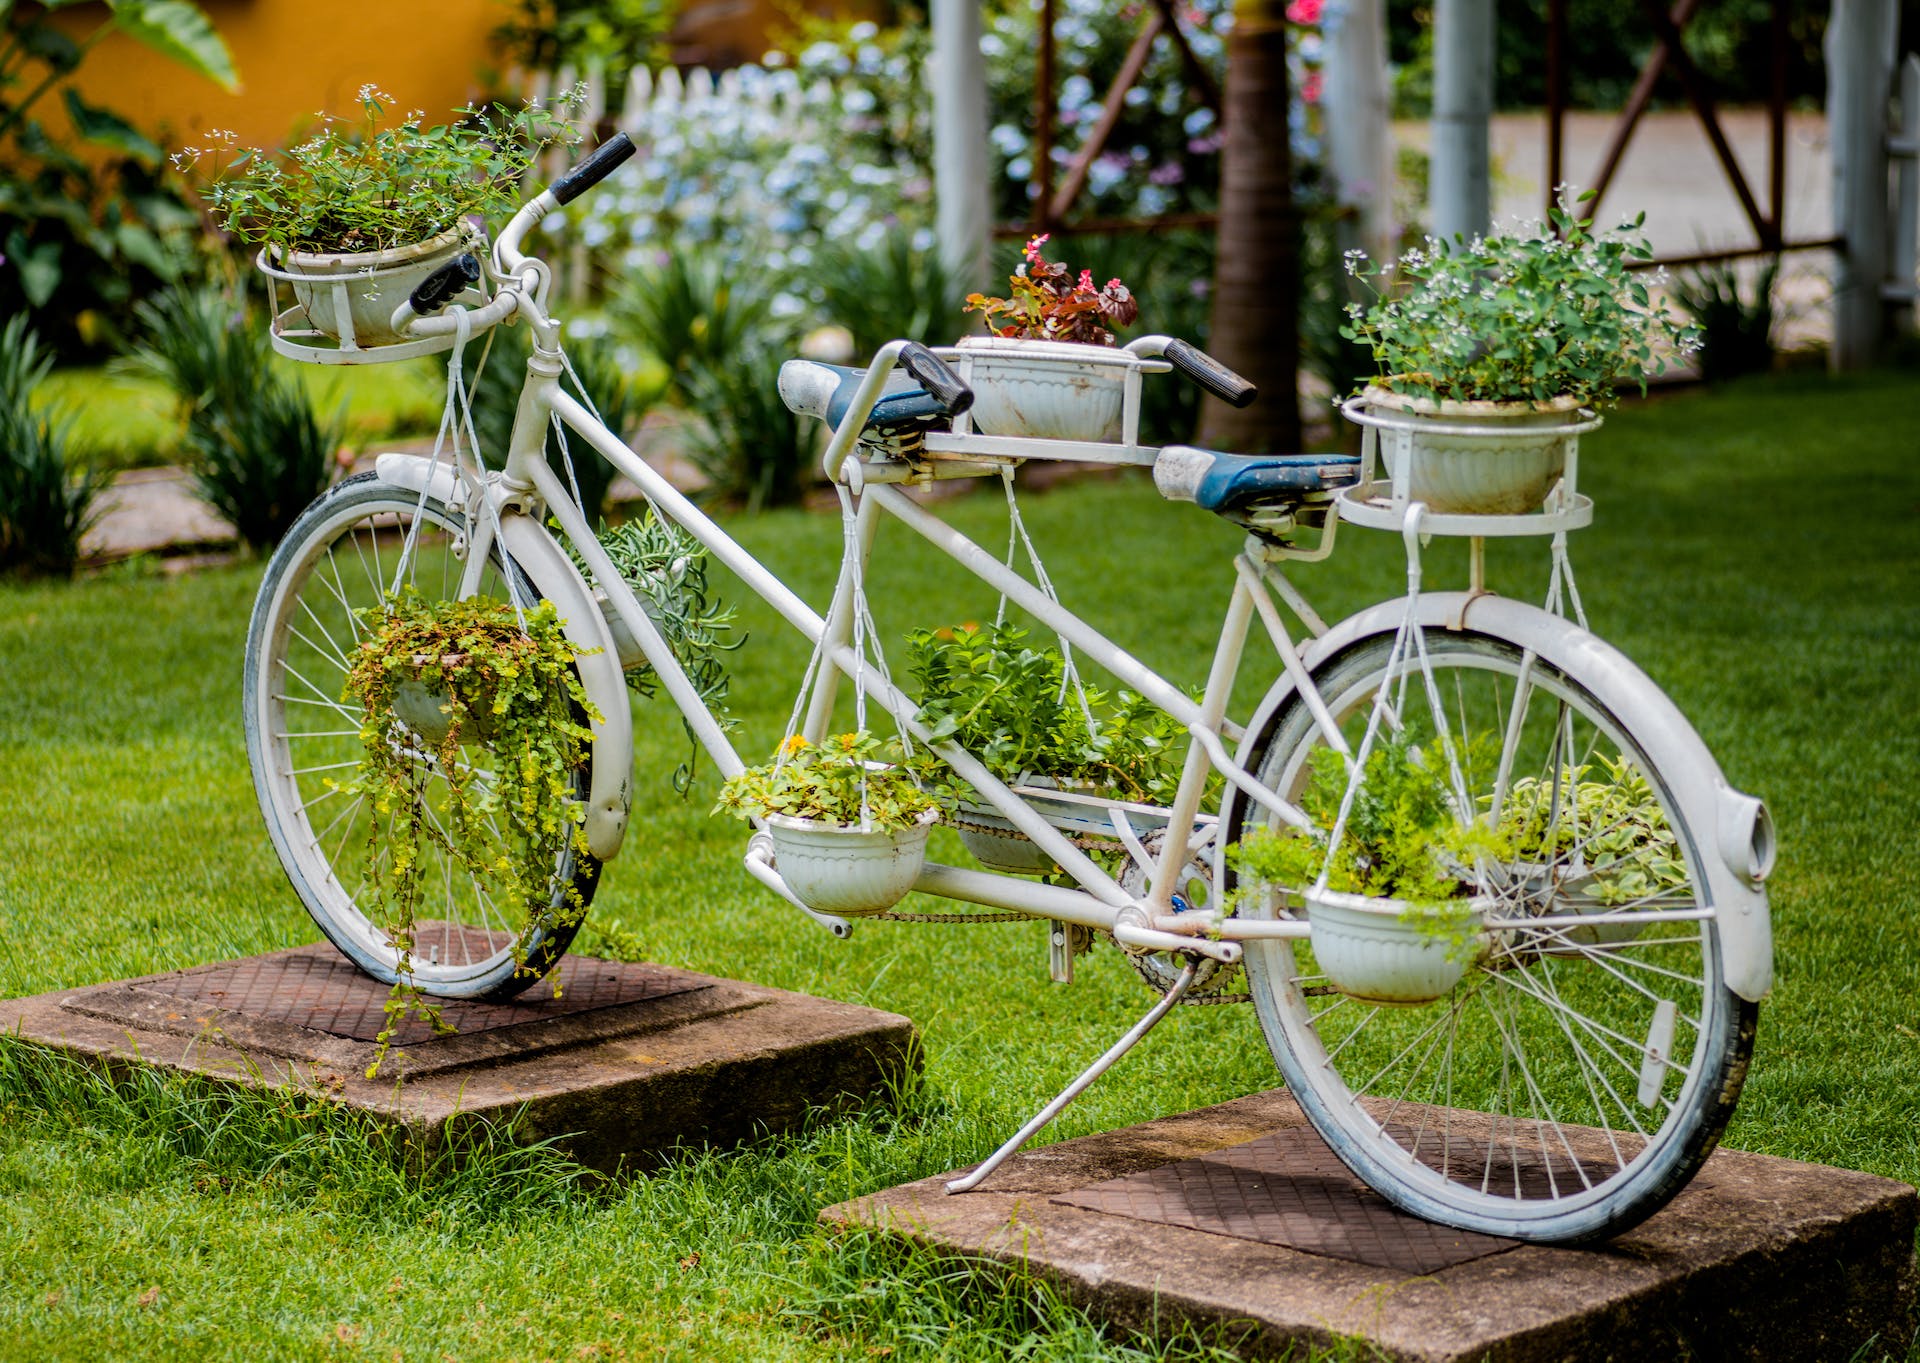 Garden design with planters on a bicycle